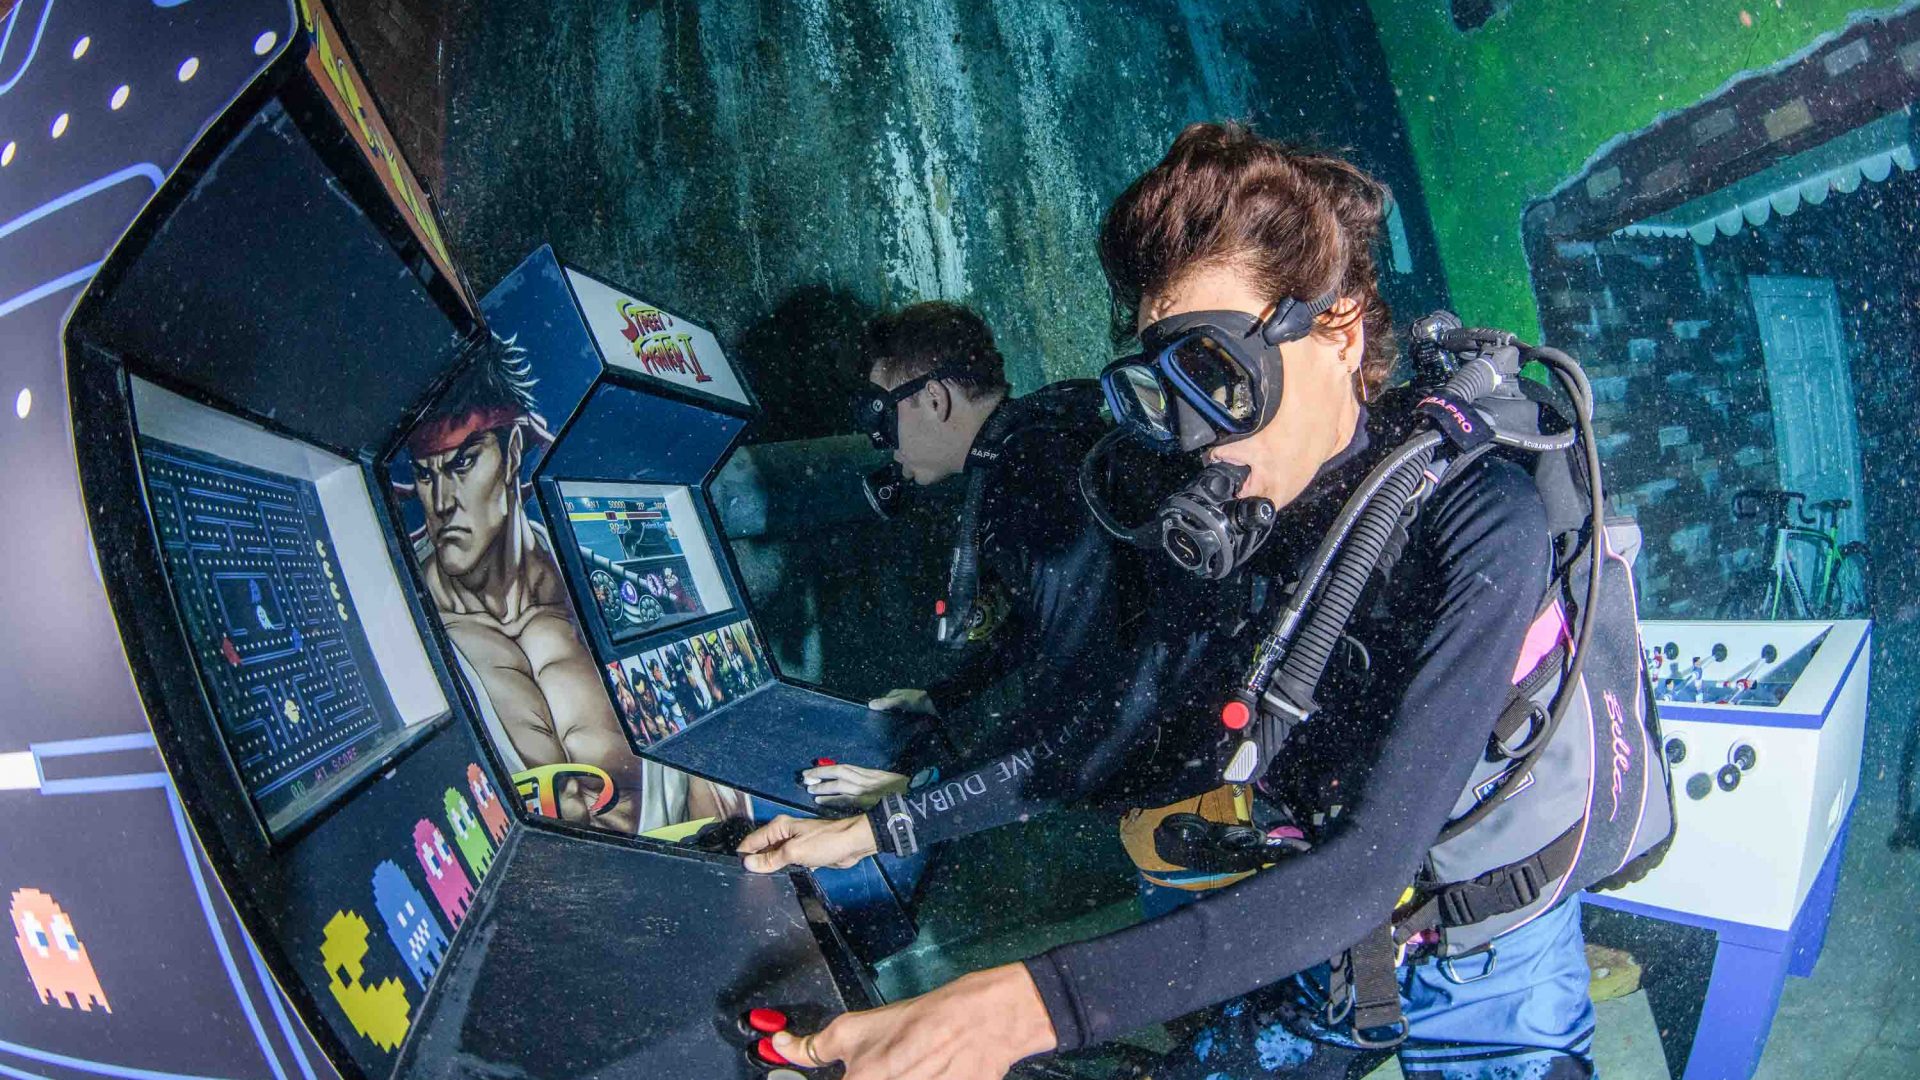 Two divers play an underwater arcade game.